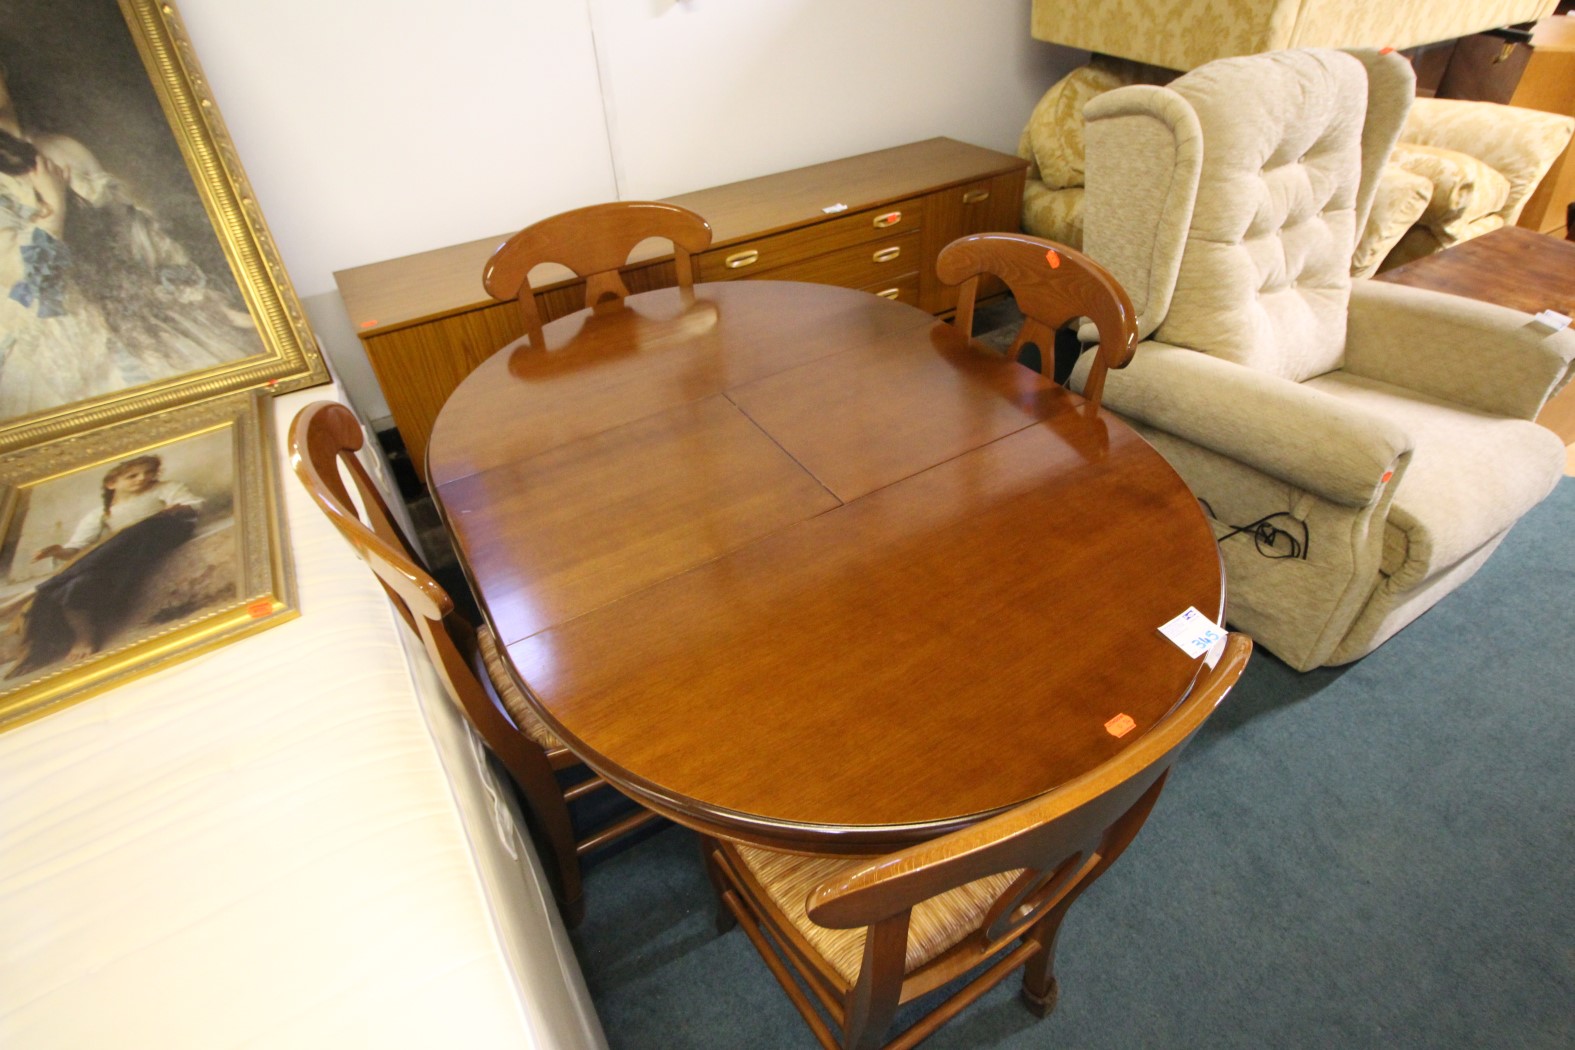 TEAK TABLE AND CHAIRS £40